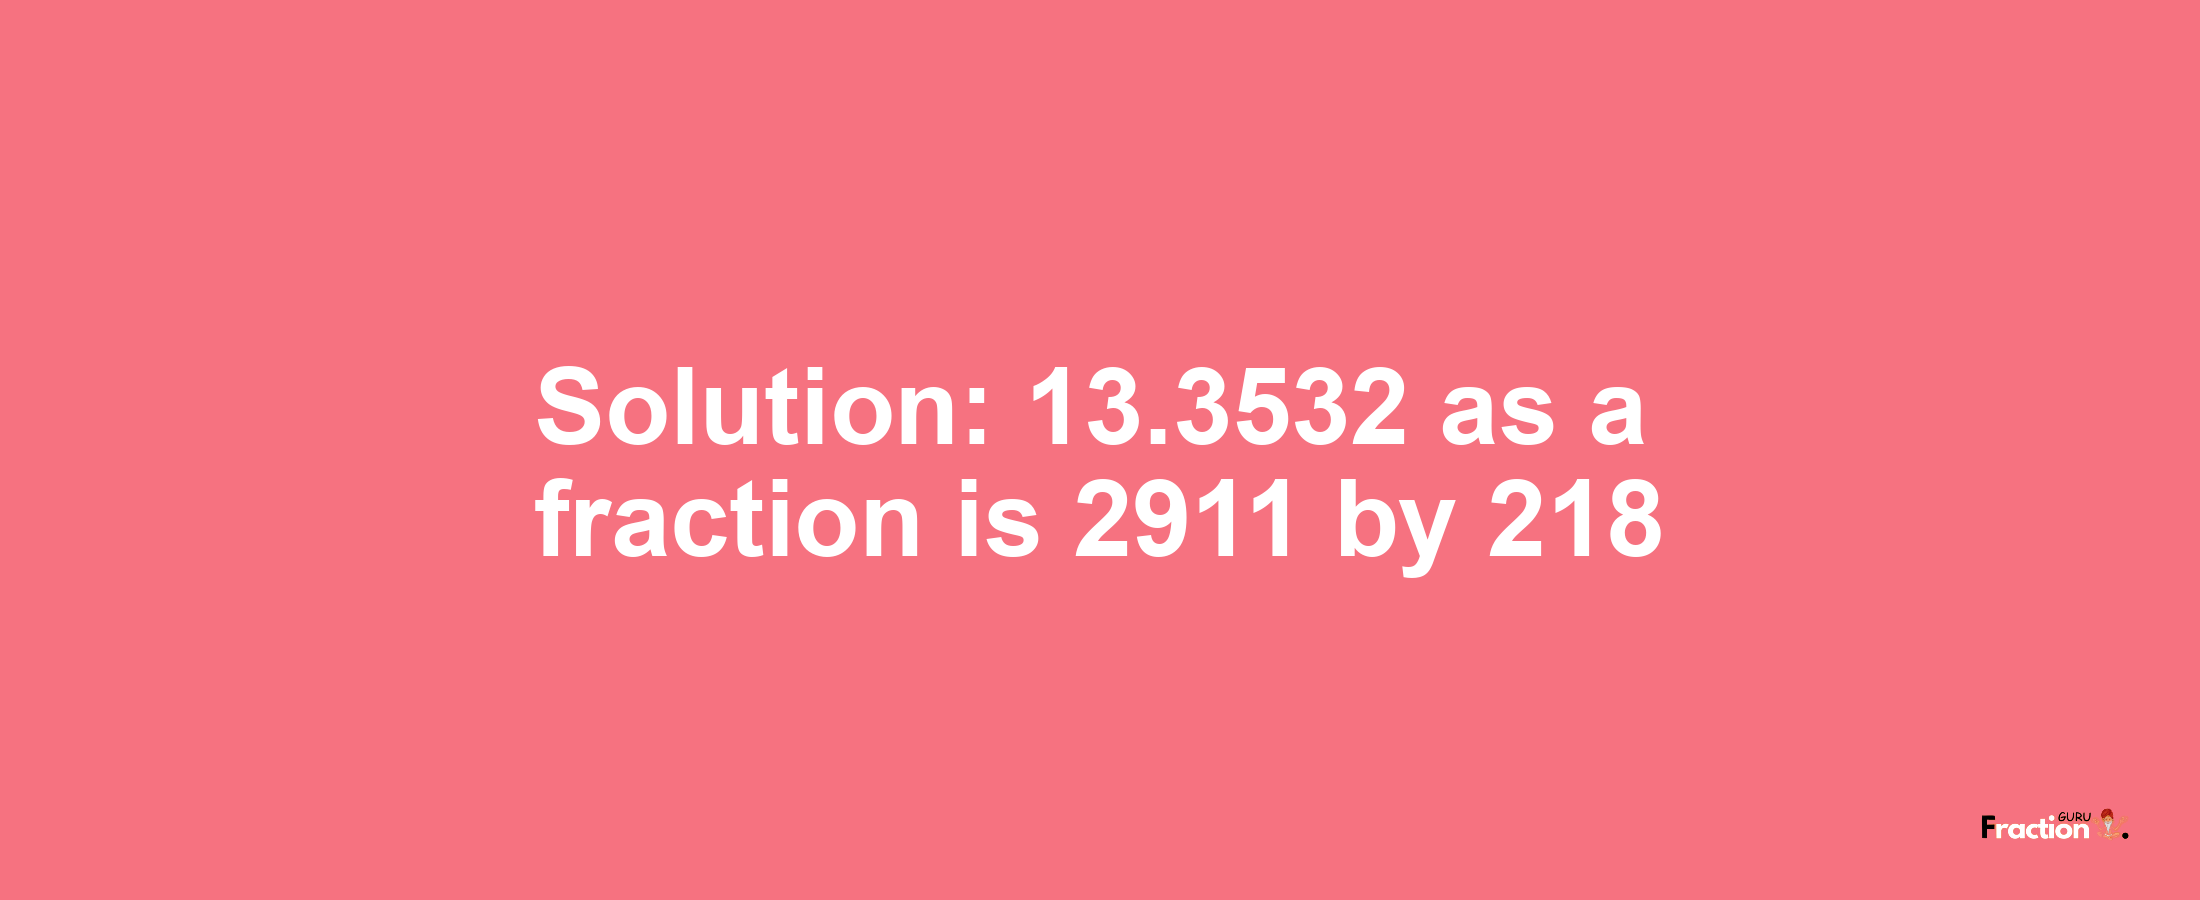 Solution:13.3532 as a fraction is 2911/218